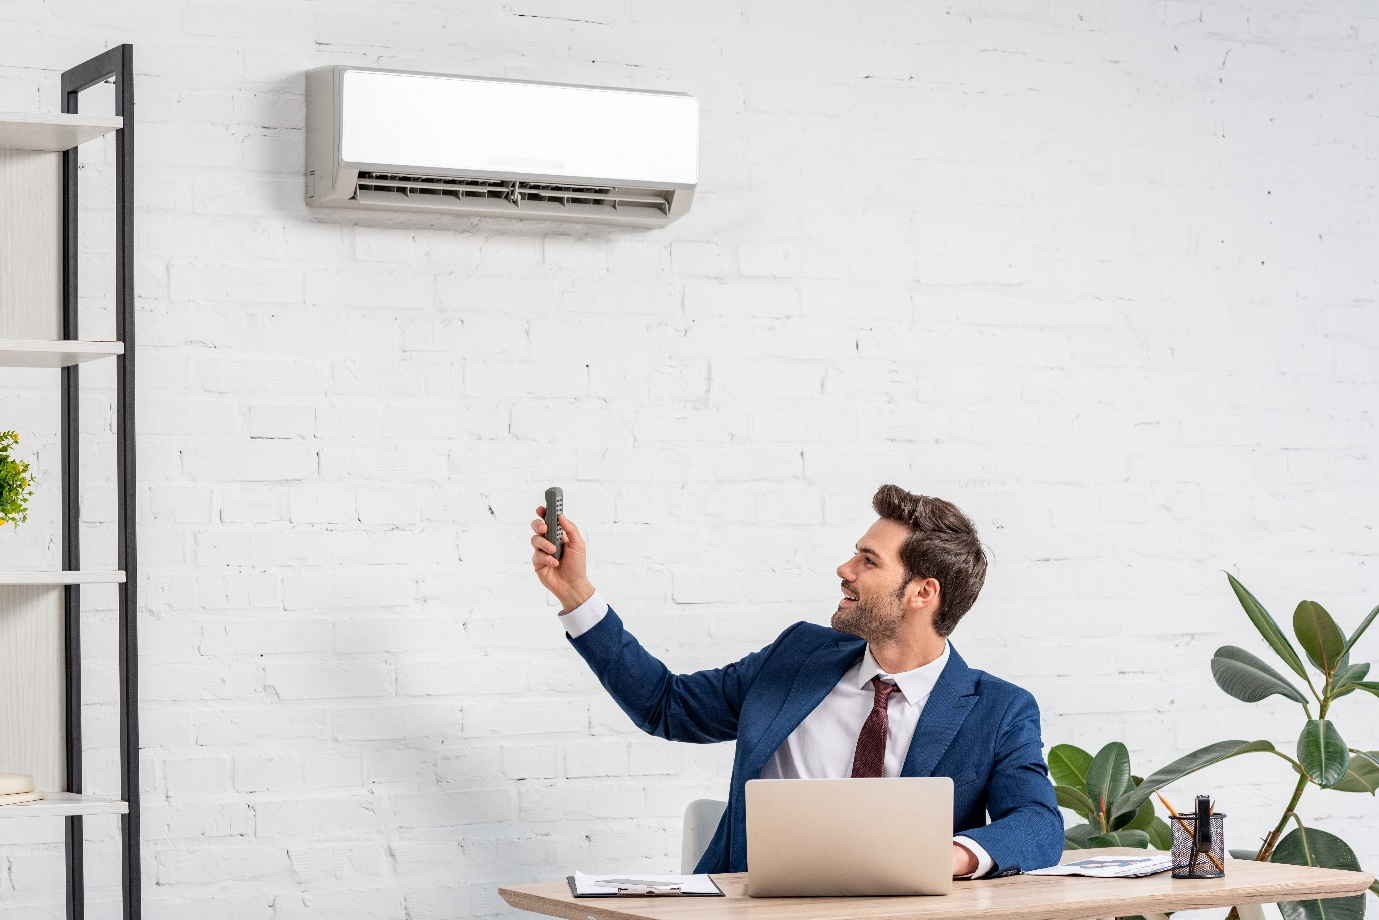 A man switching on an air conditioner